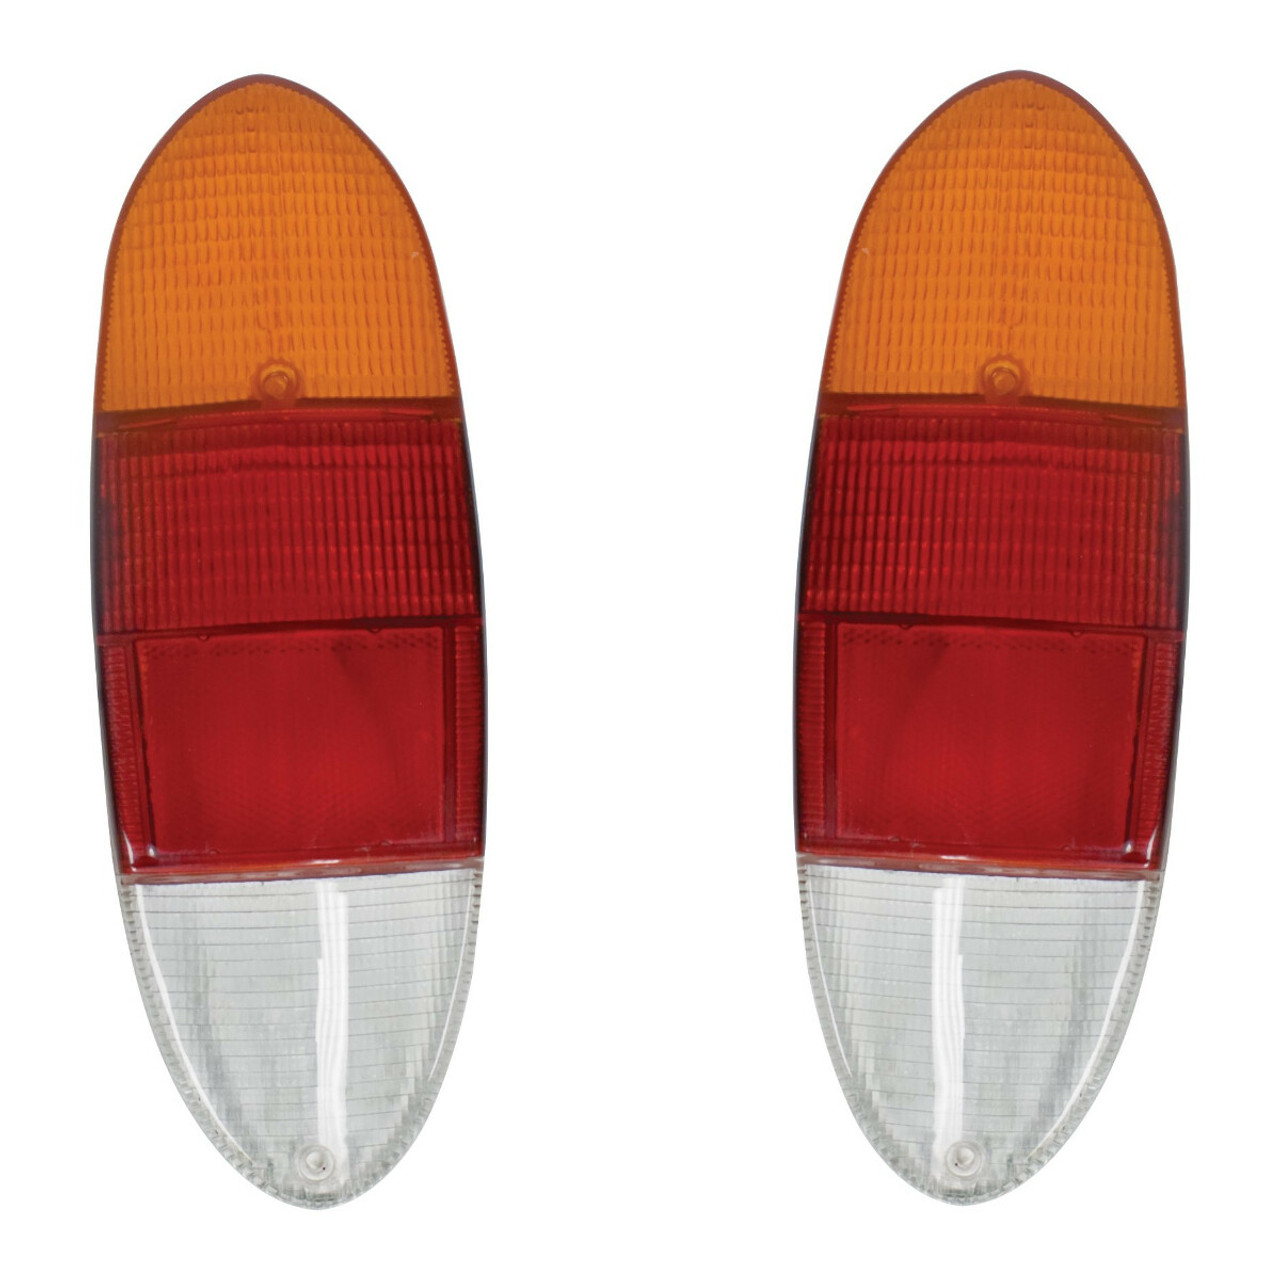 Tail Light Lenses, Pair, Compatible with VW Type 3 70-73, Ghia 72-74